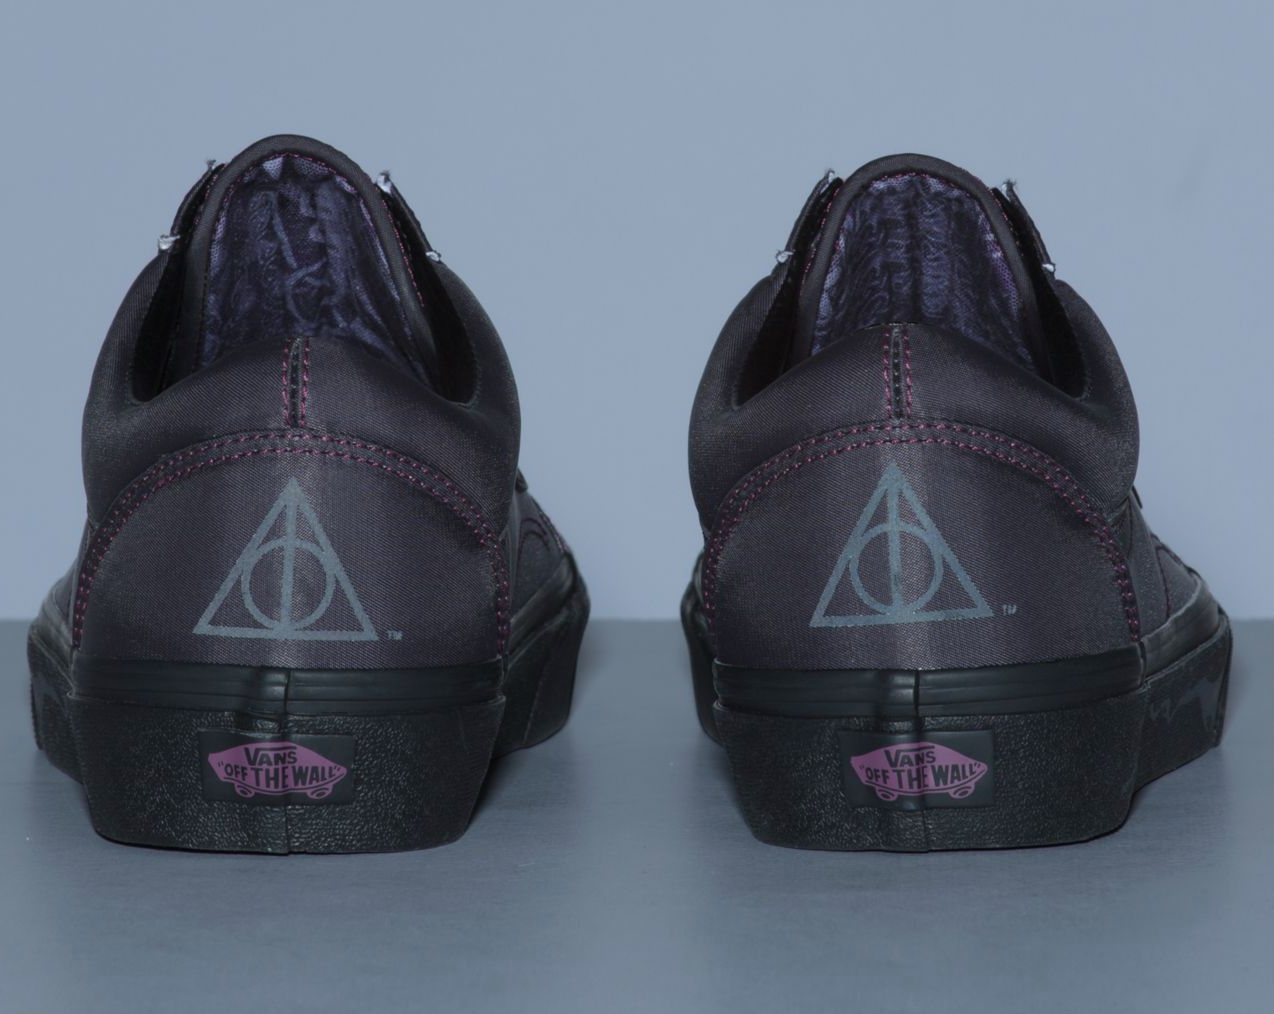 vans harry potter collection